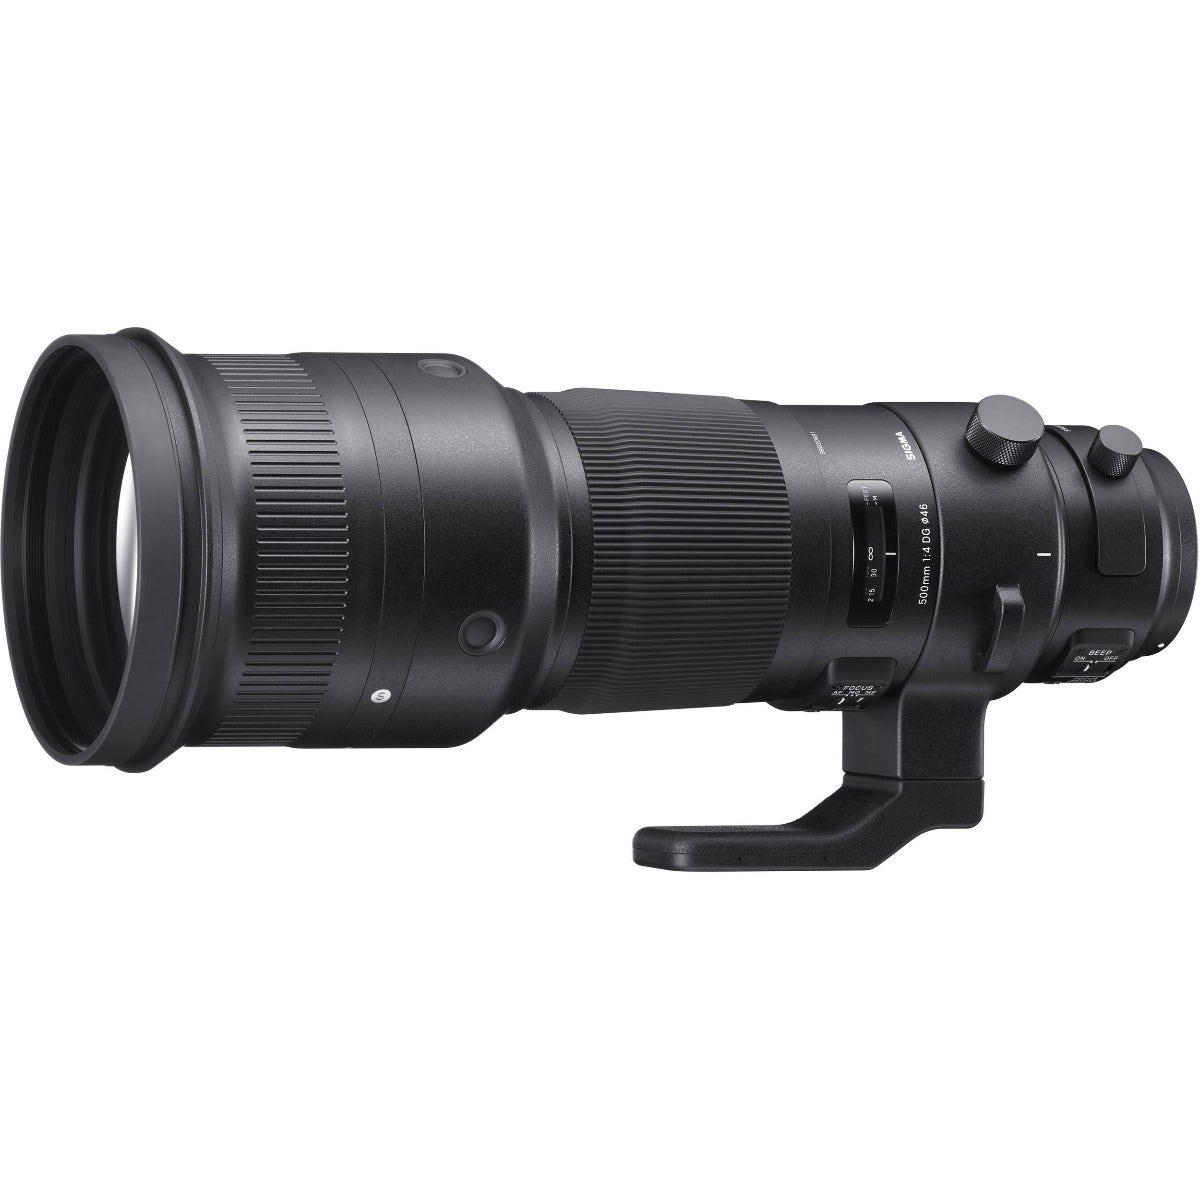 Image of Sigma 500mm f/4 DG OS HSM Sports Lens - Canon